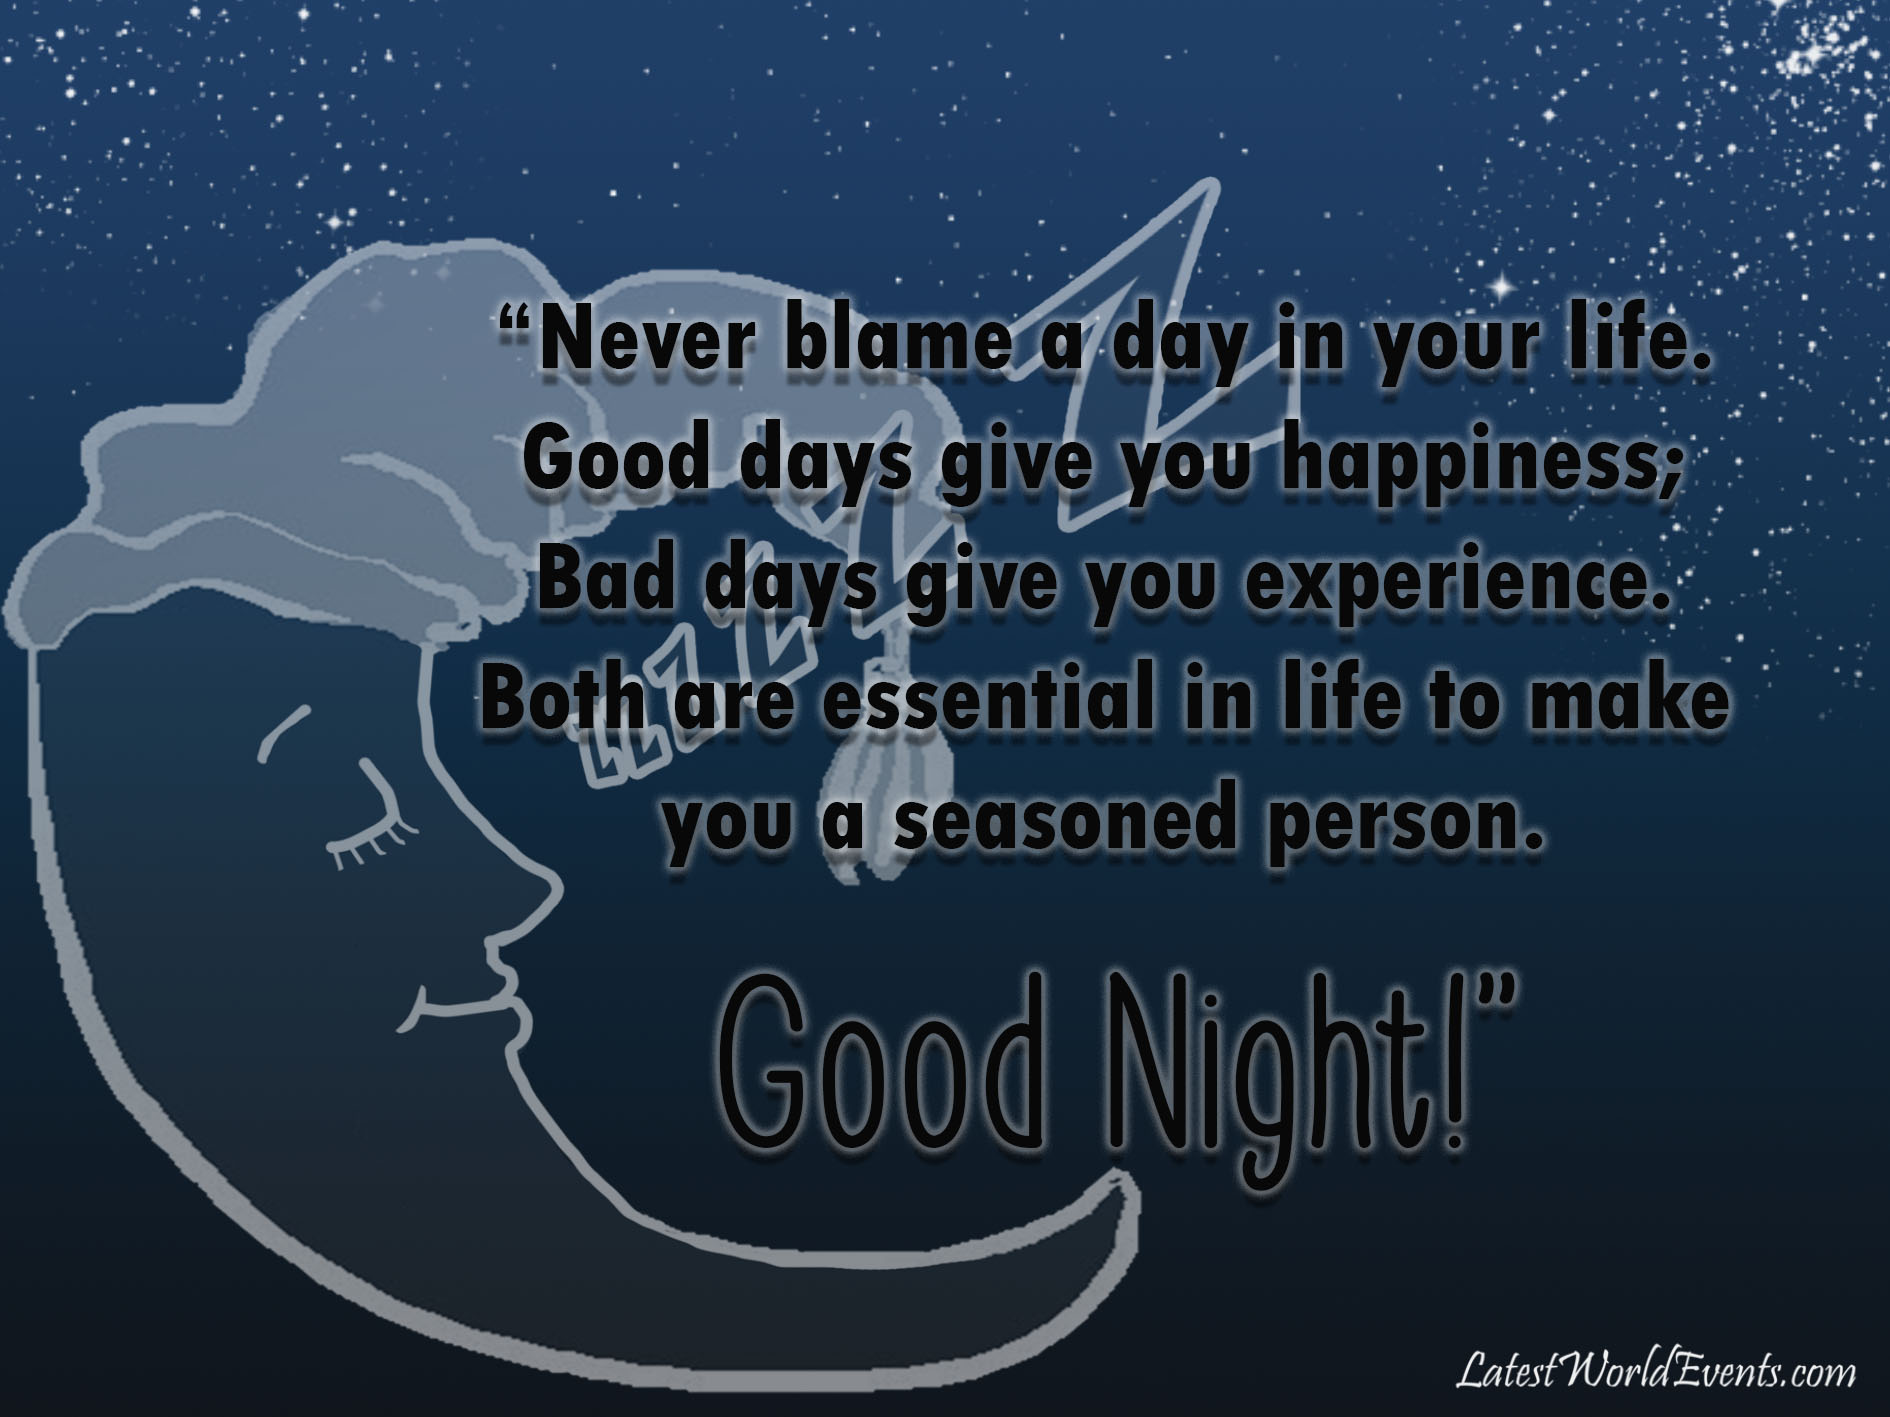 Cute-good-night-sister-wishes-cards